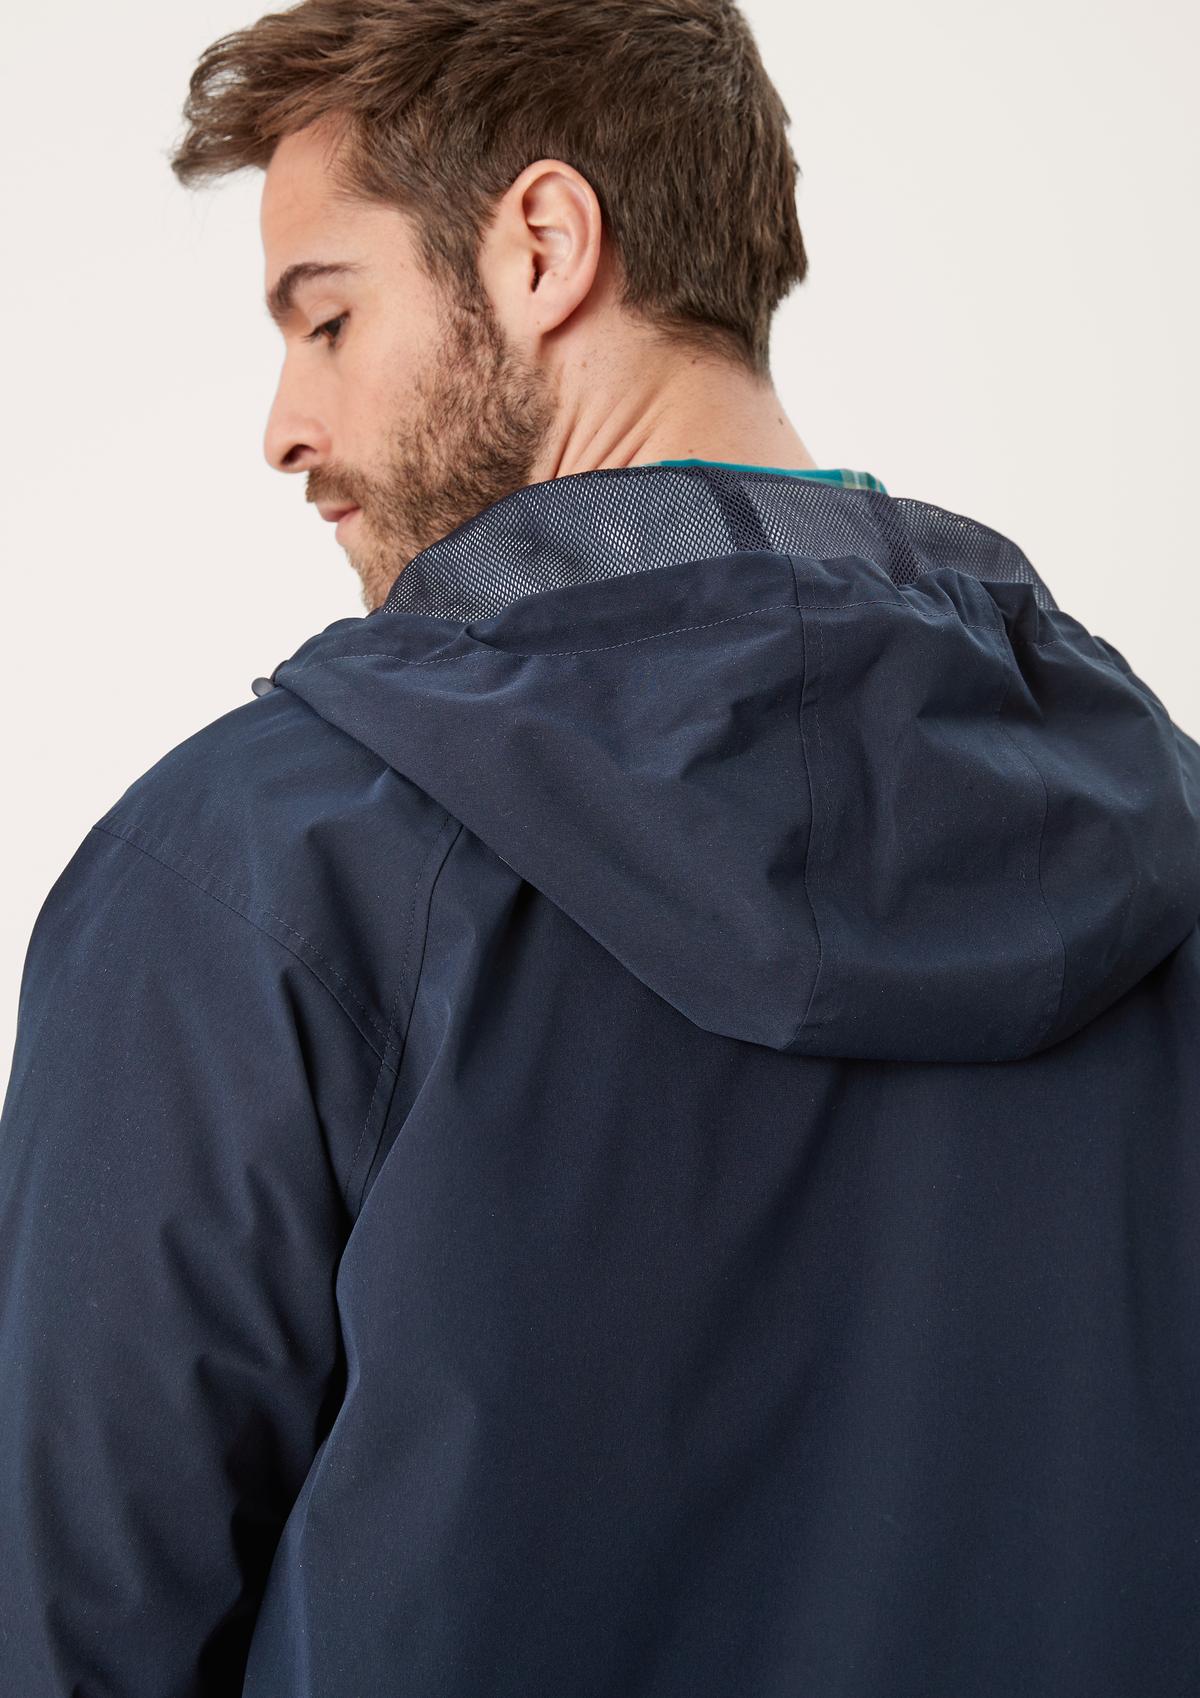 s.Oliver Weatherproof jacket with mesh lining